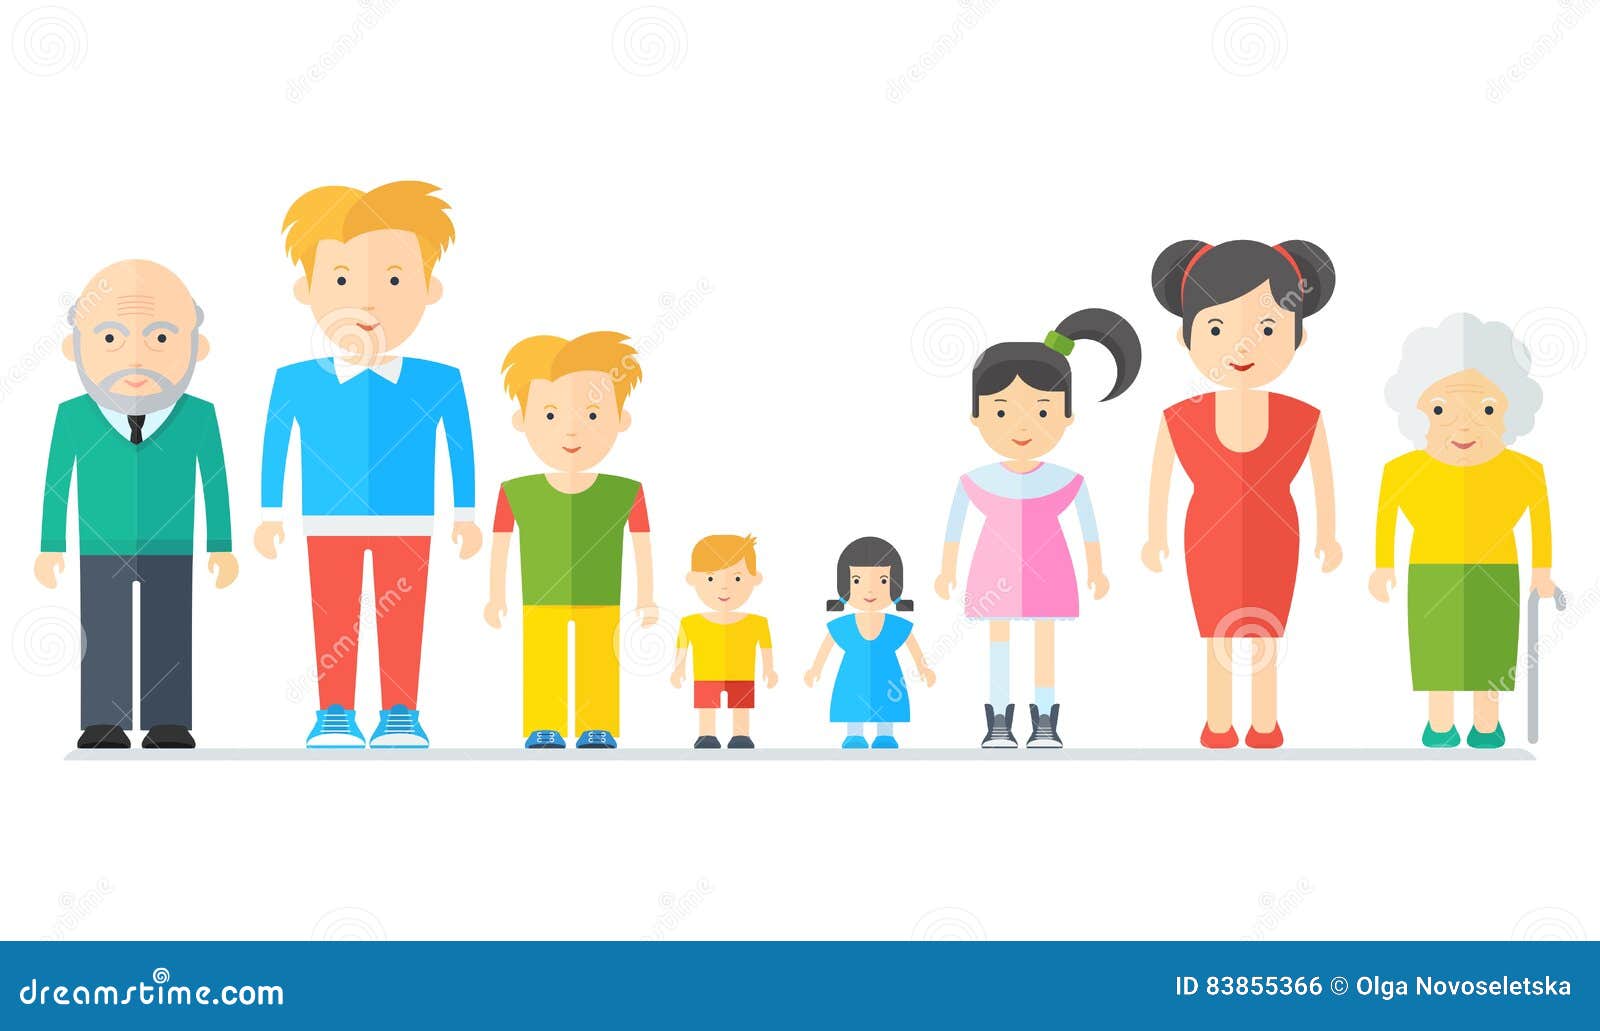 Big happy family stock vector. Illustration of cute, background - 83855366